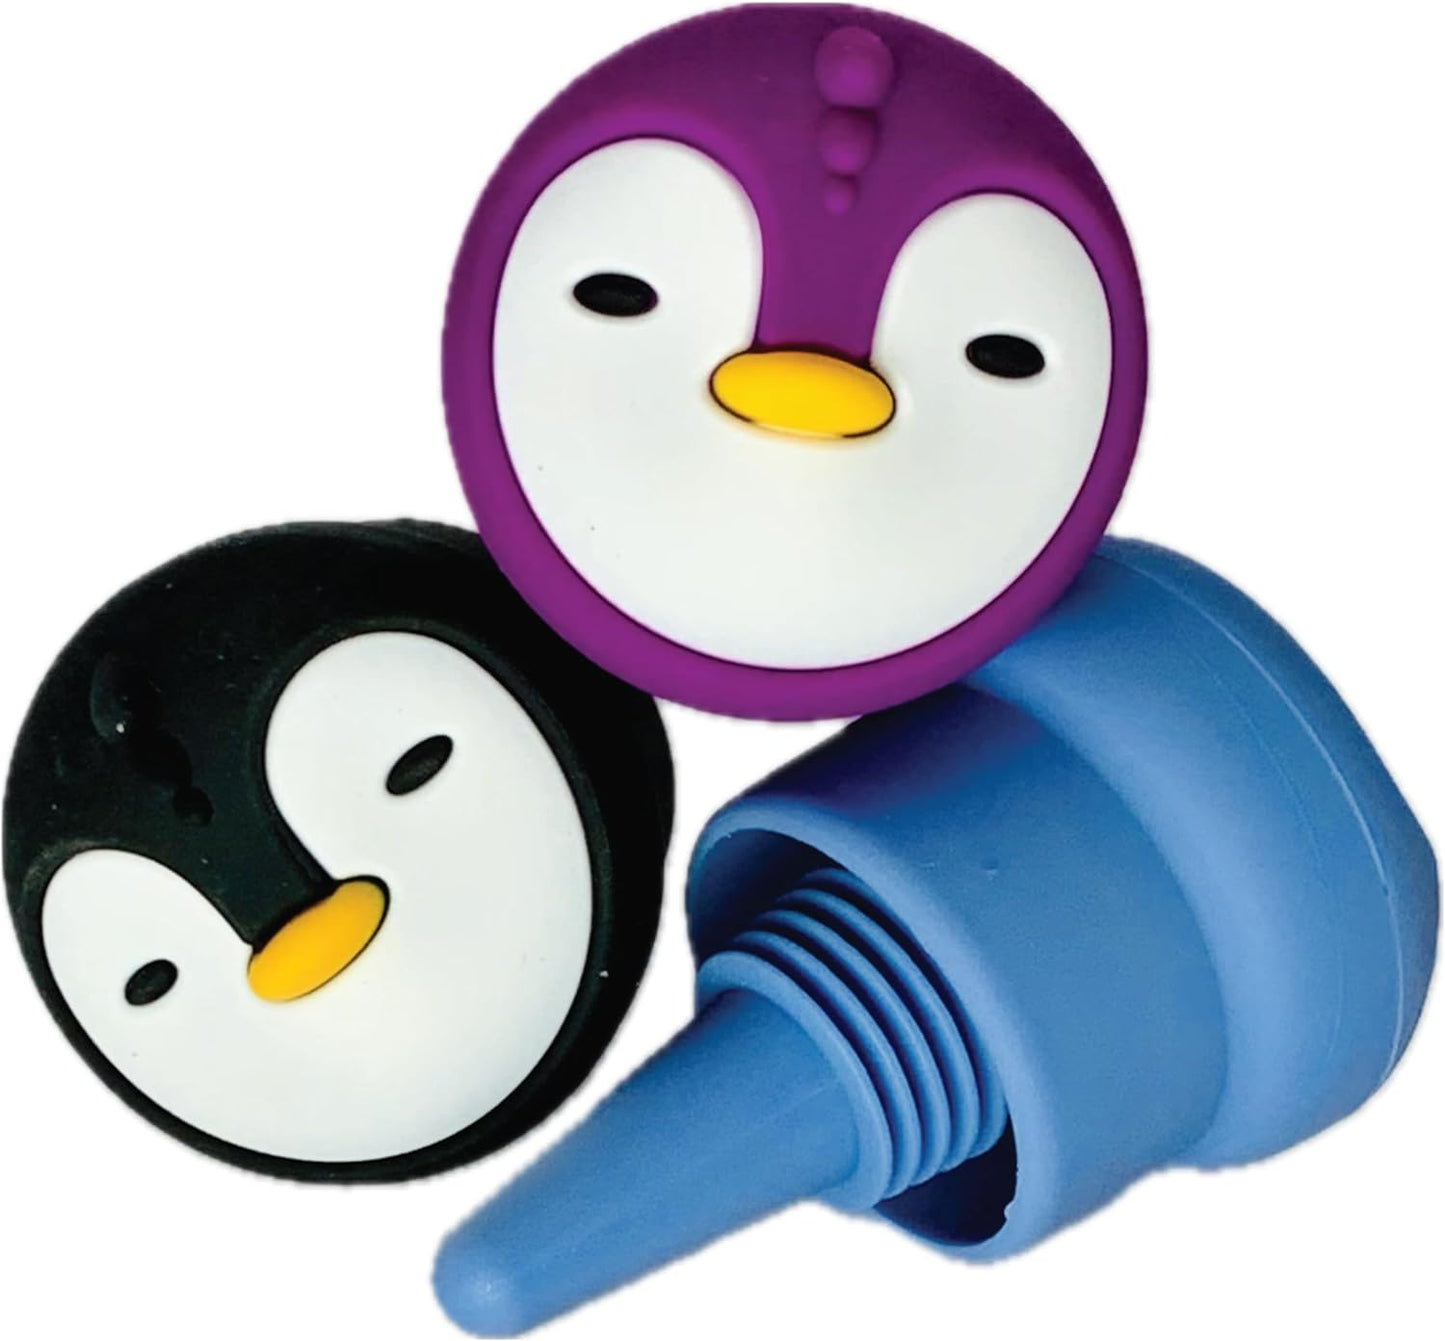 Corky Winers - Penguin Silicone Wine Stoppers - Versatile, Leakproof New Double Seal Design, and Easy to Use for Wine, Oils, and More - Colorful Trio Pack (Black, Purple, Blue) - BPA Free Silicone